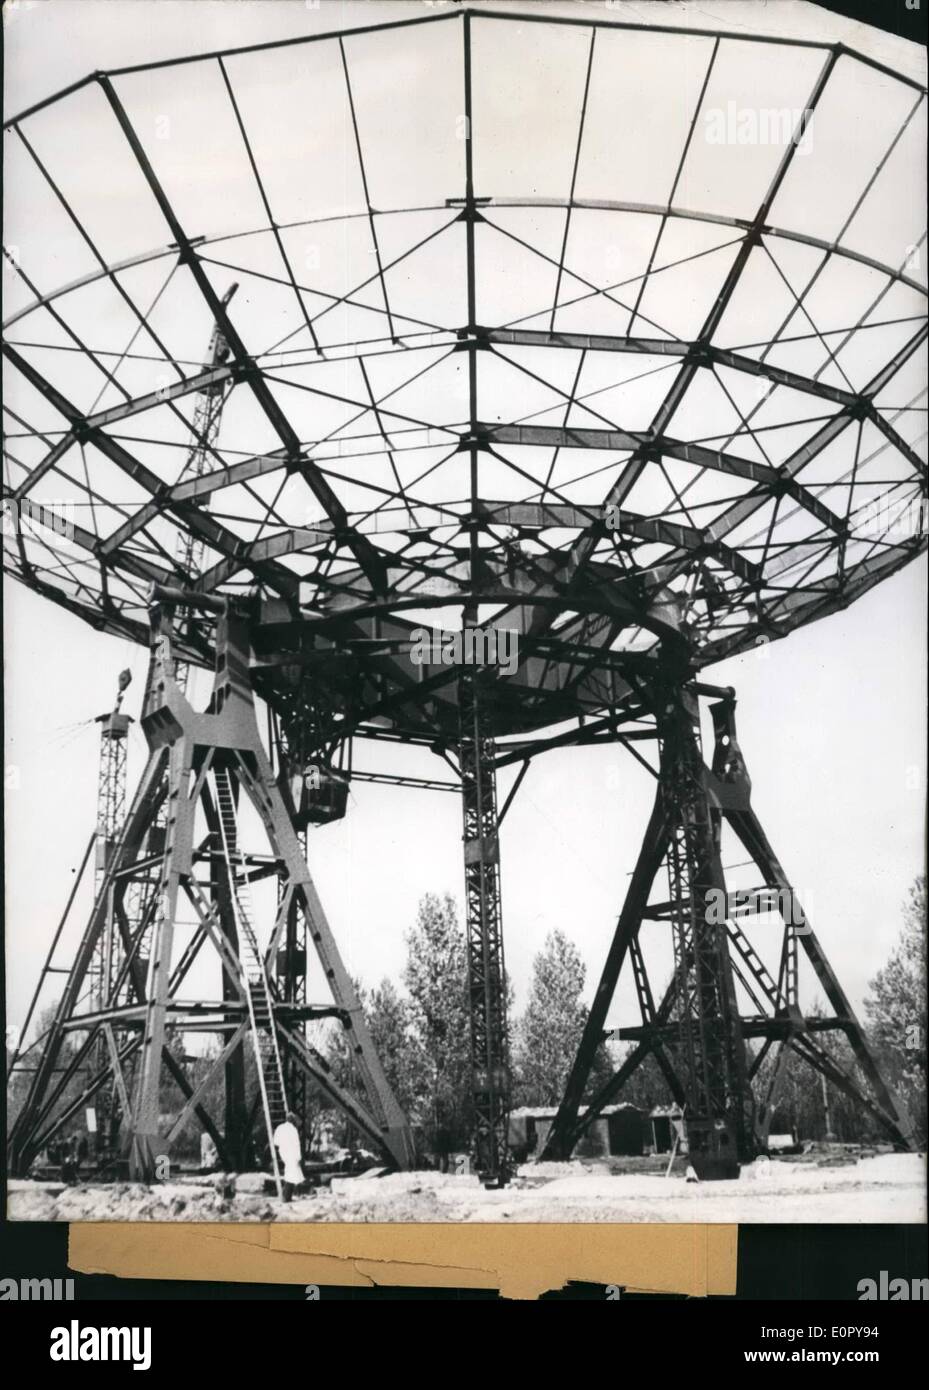 May 05, 1957 - Second largest radio-telescope in the world near completion: A large radio-telescope with a diameter of 120 feet Stock Photo